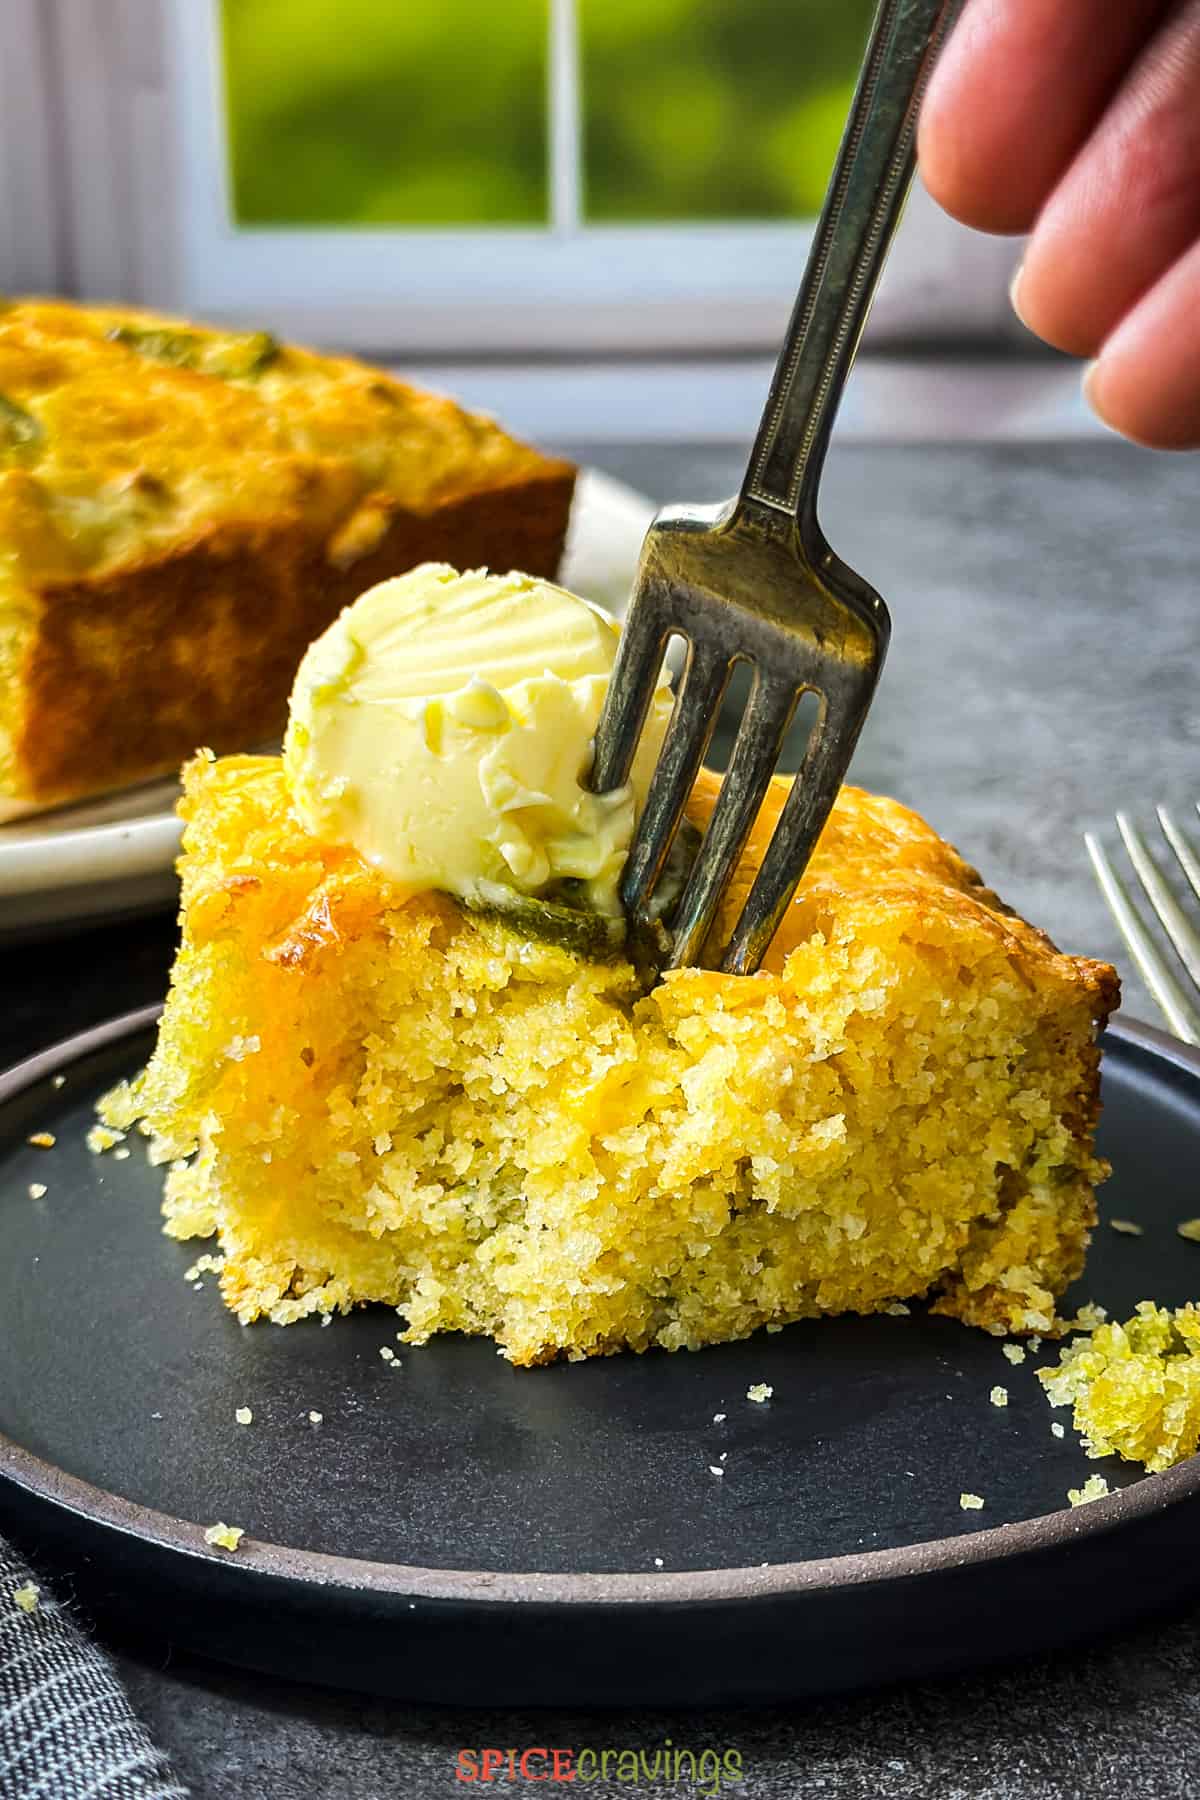 A fork cutting through butter into a slice of cornbread